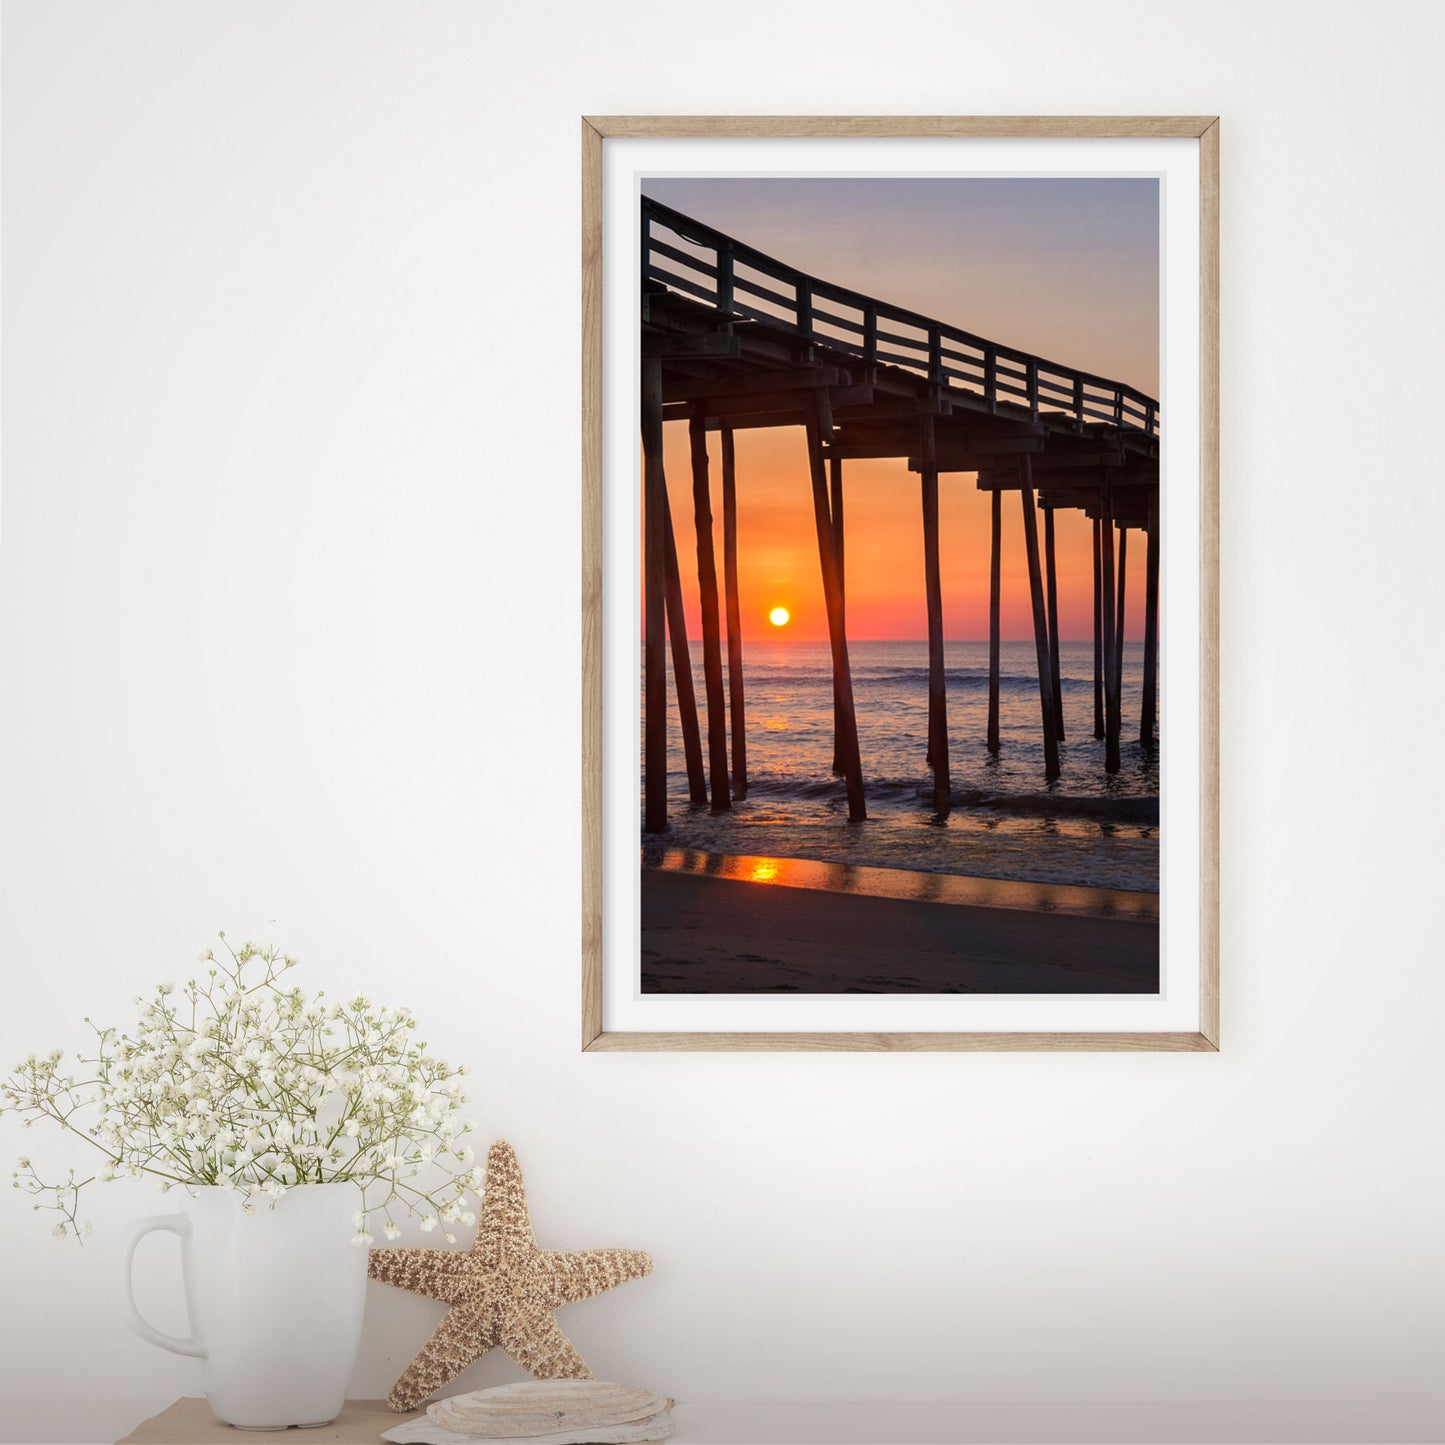 Photography print featuring Avon Pier in the Outer Banks of North Carolina at sunrise